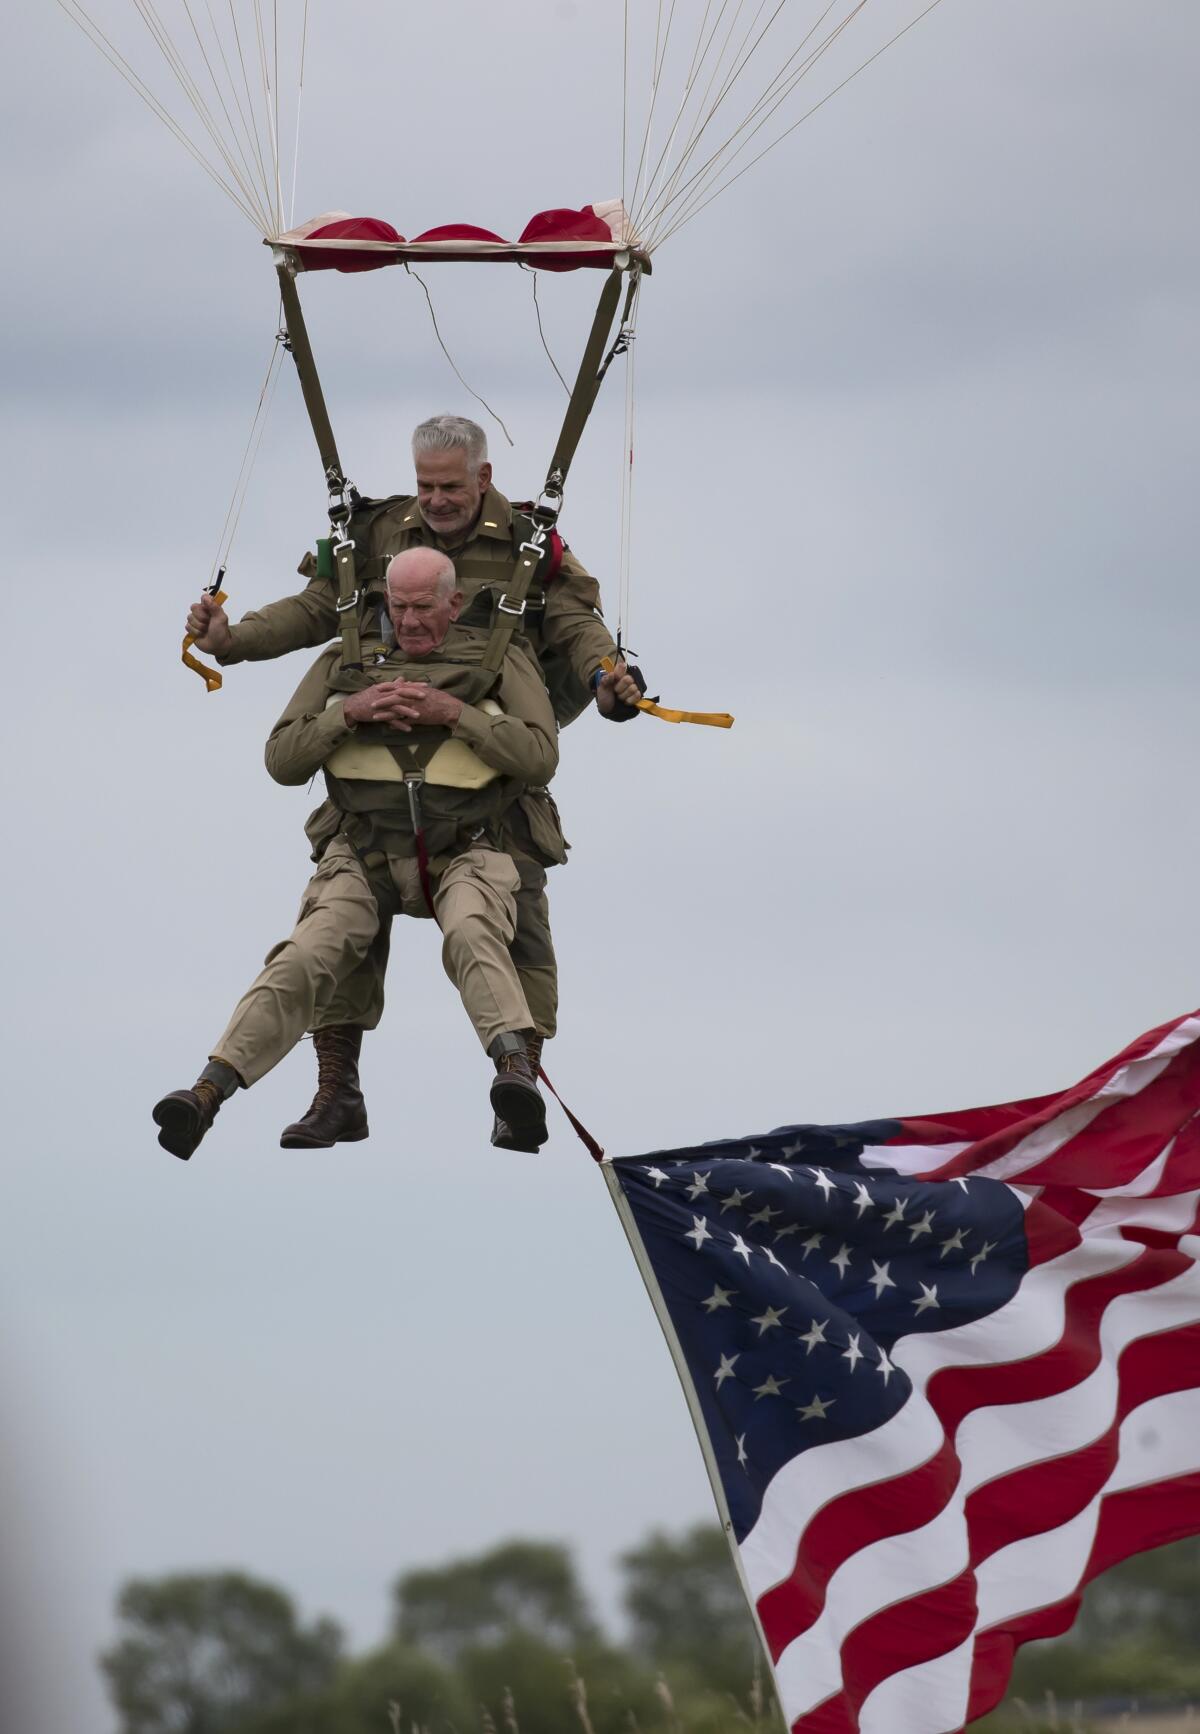 Tom Rice parachutes in a tandem jump into a field in Normandy, France, on June 5, 2019.